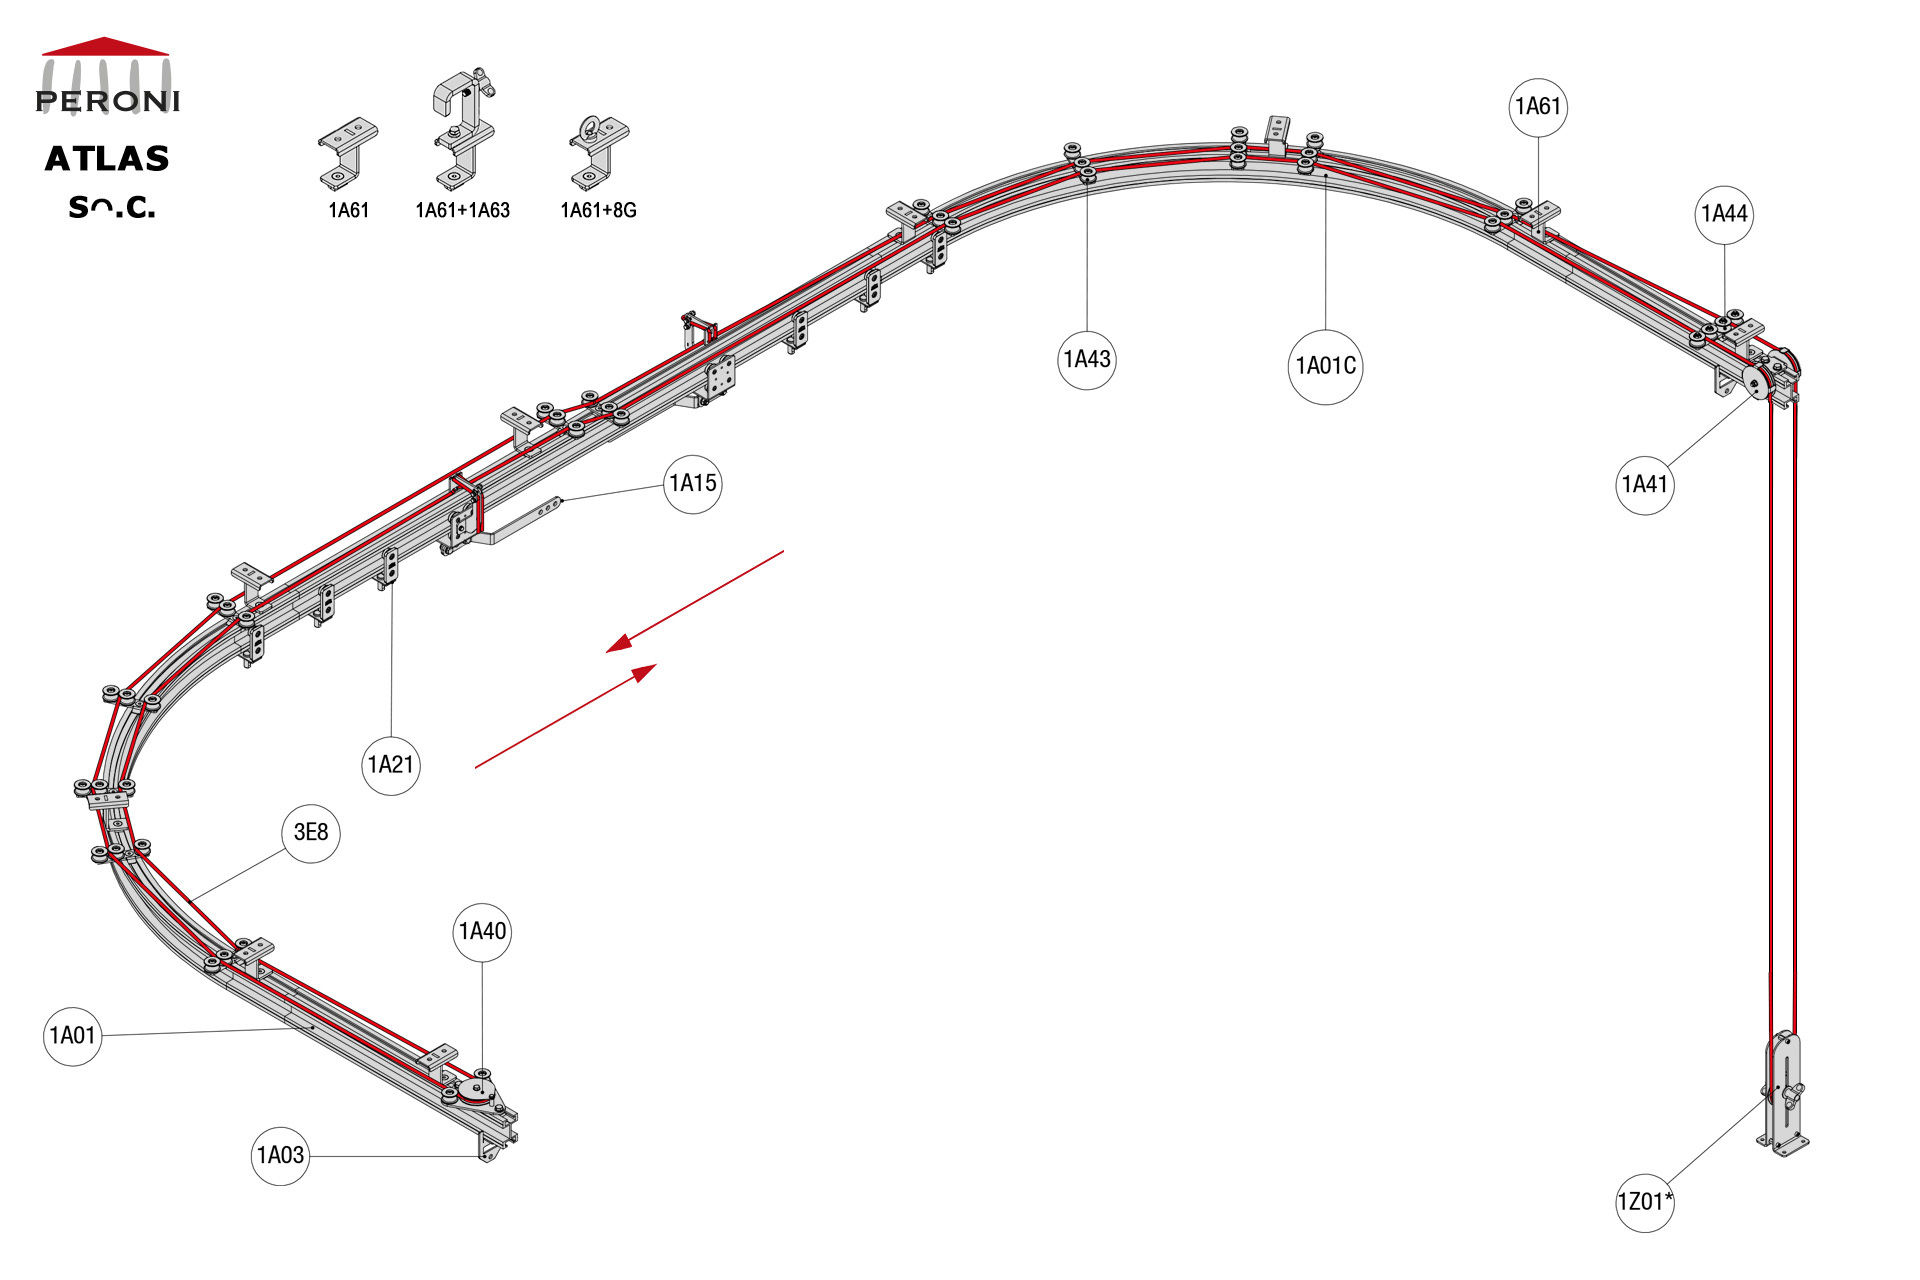 Sᴖ.C. configuration track Sᴖ. Curved single rail central openingC. Corded manualup to 50 cm central overlapComponents1A01 - Straight rail1A01C - Curved rail1A02 - Connection set1A03 - End stop1A12 - Top cord master carrier1A15 - Overlap arm1A20 - 2 Wheel runnerMotion control1A40 - Return pulley1A41 - Head double pulley1A43 - Top cord guide1A44 - Top cord aligner1Z01 - See all options3E - Franghie Poly Ø 8 mm